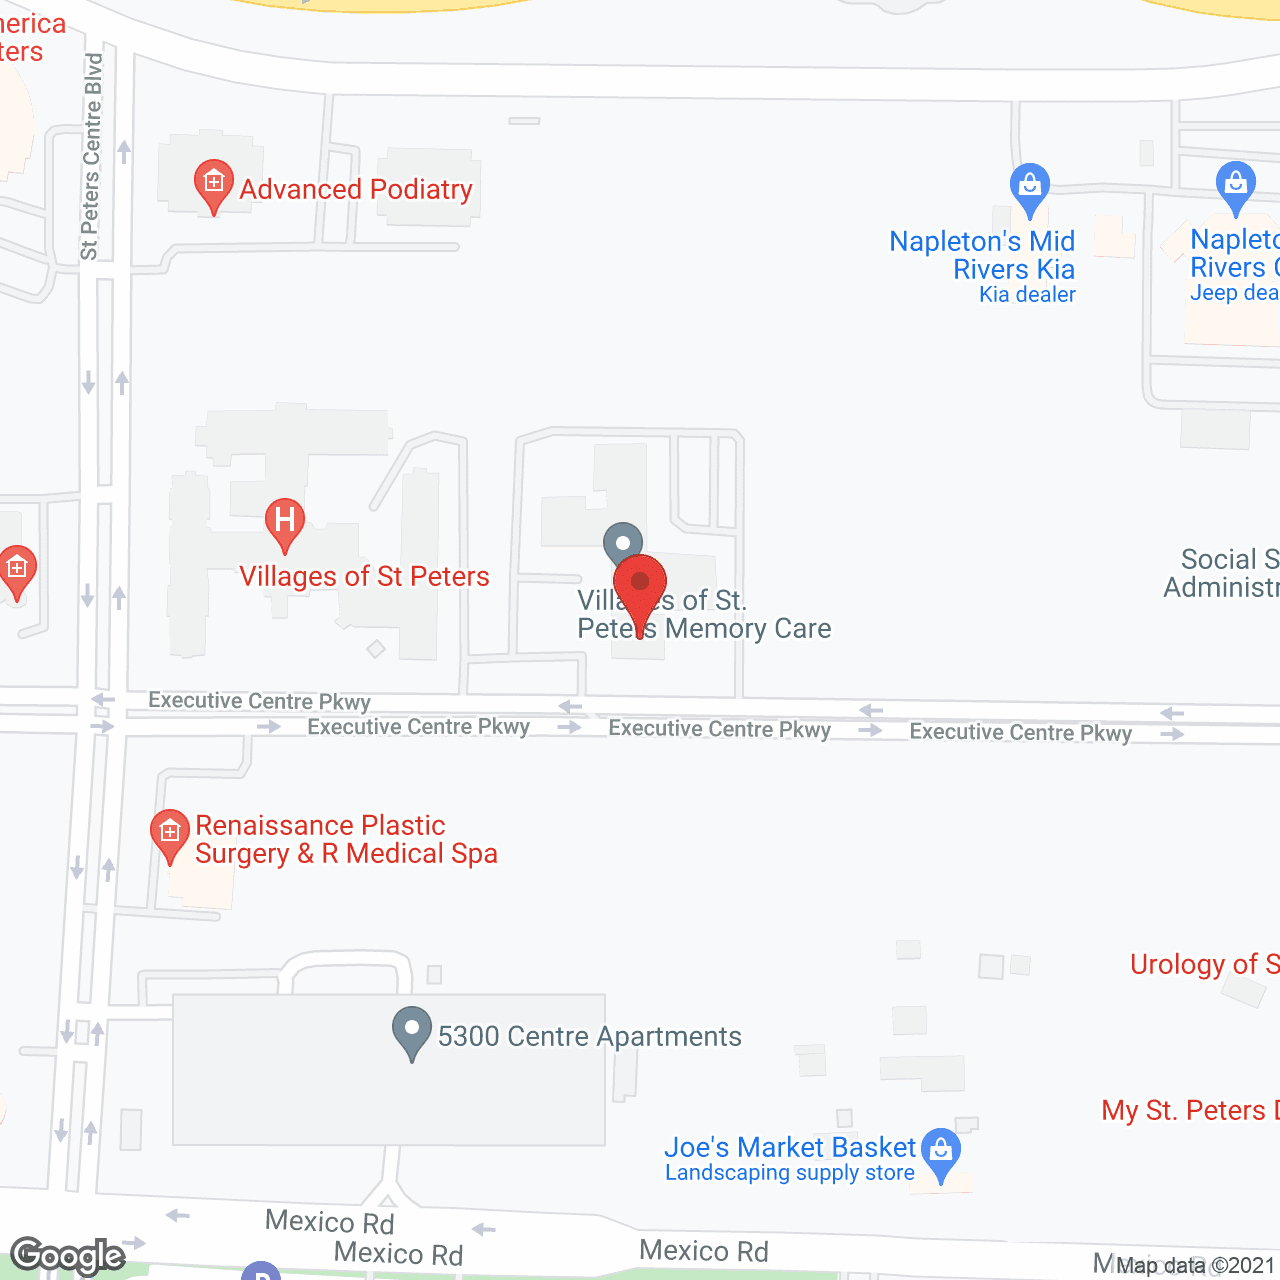 Villages of St. Peters Memory Care in google map